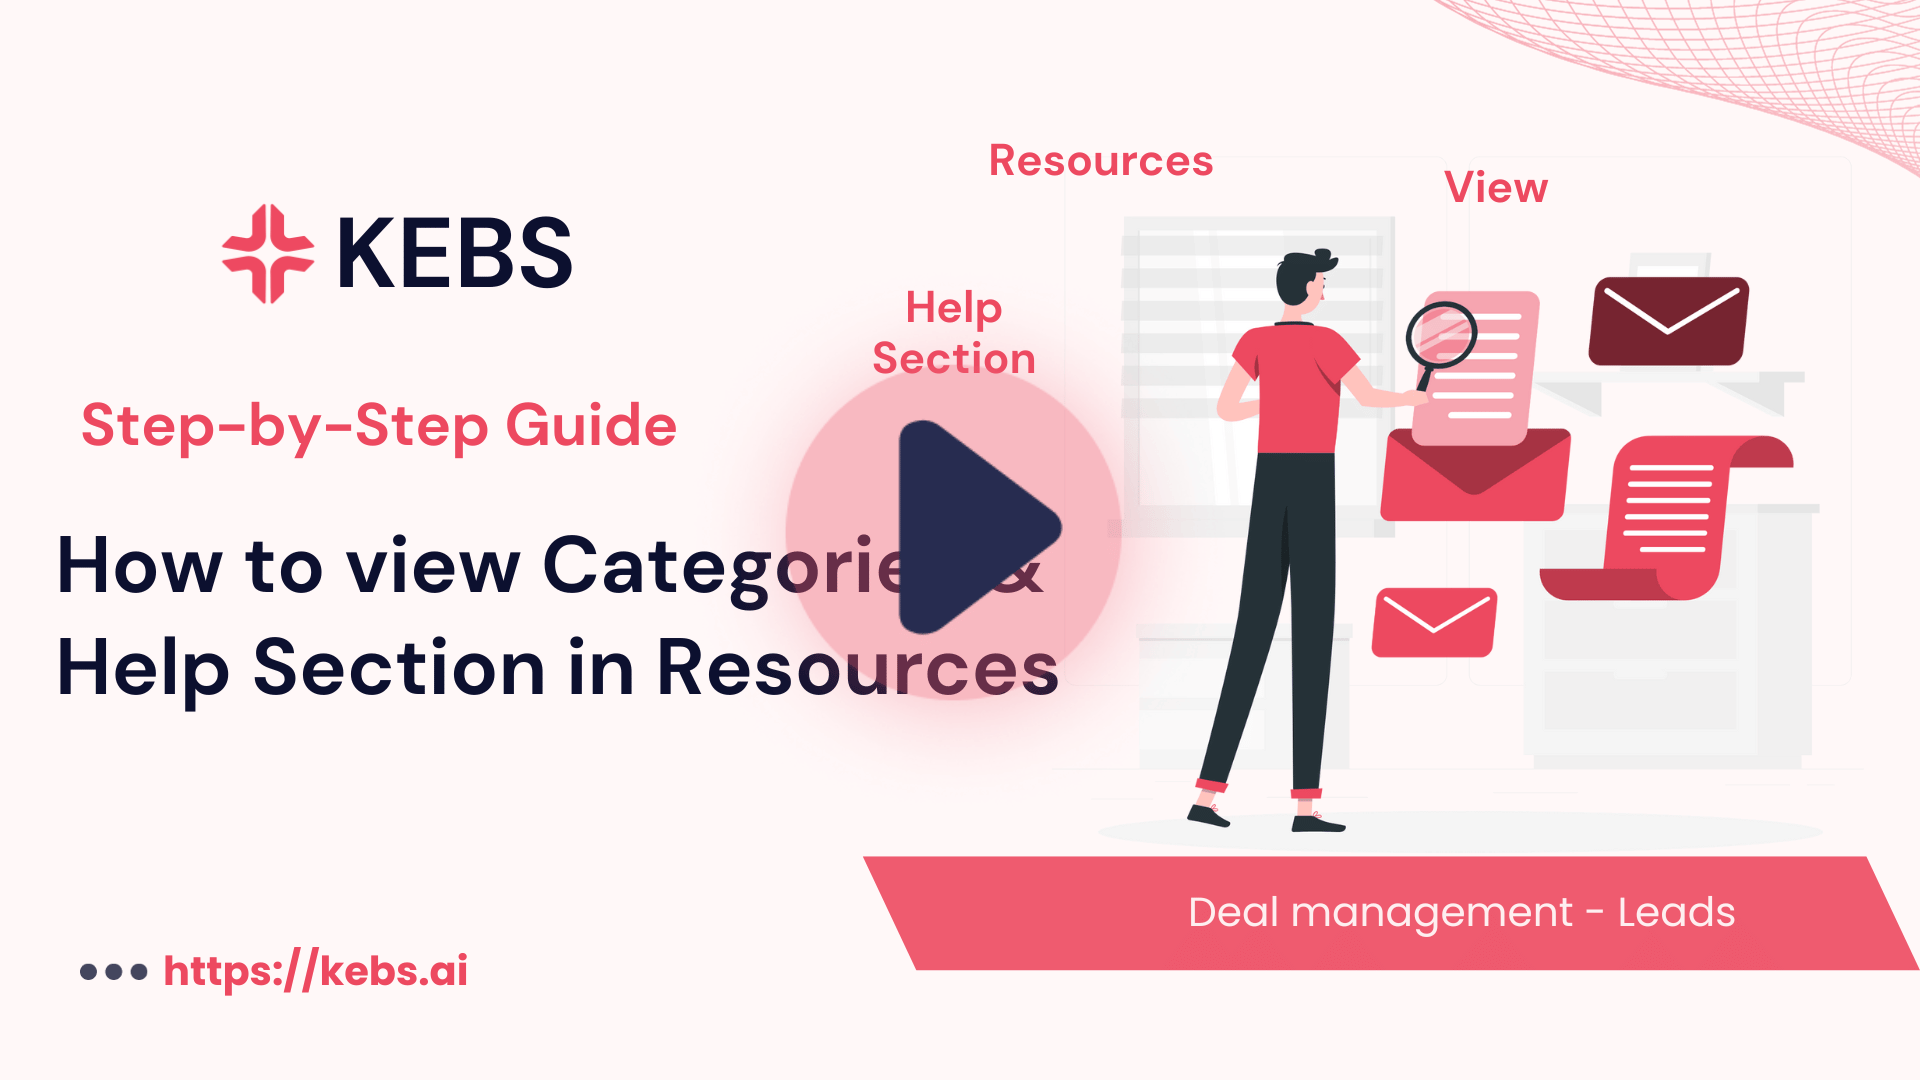 How to view Categories & Help Section in Resources